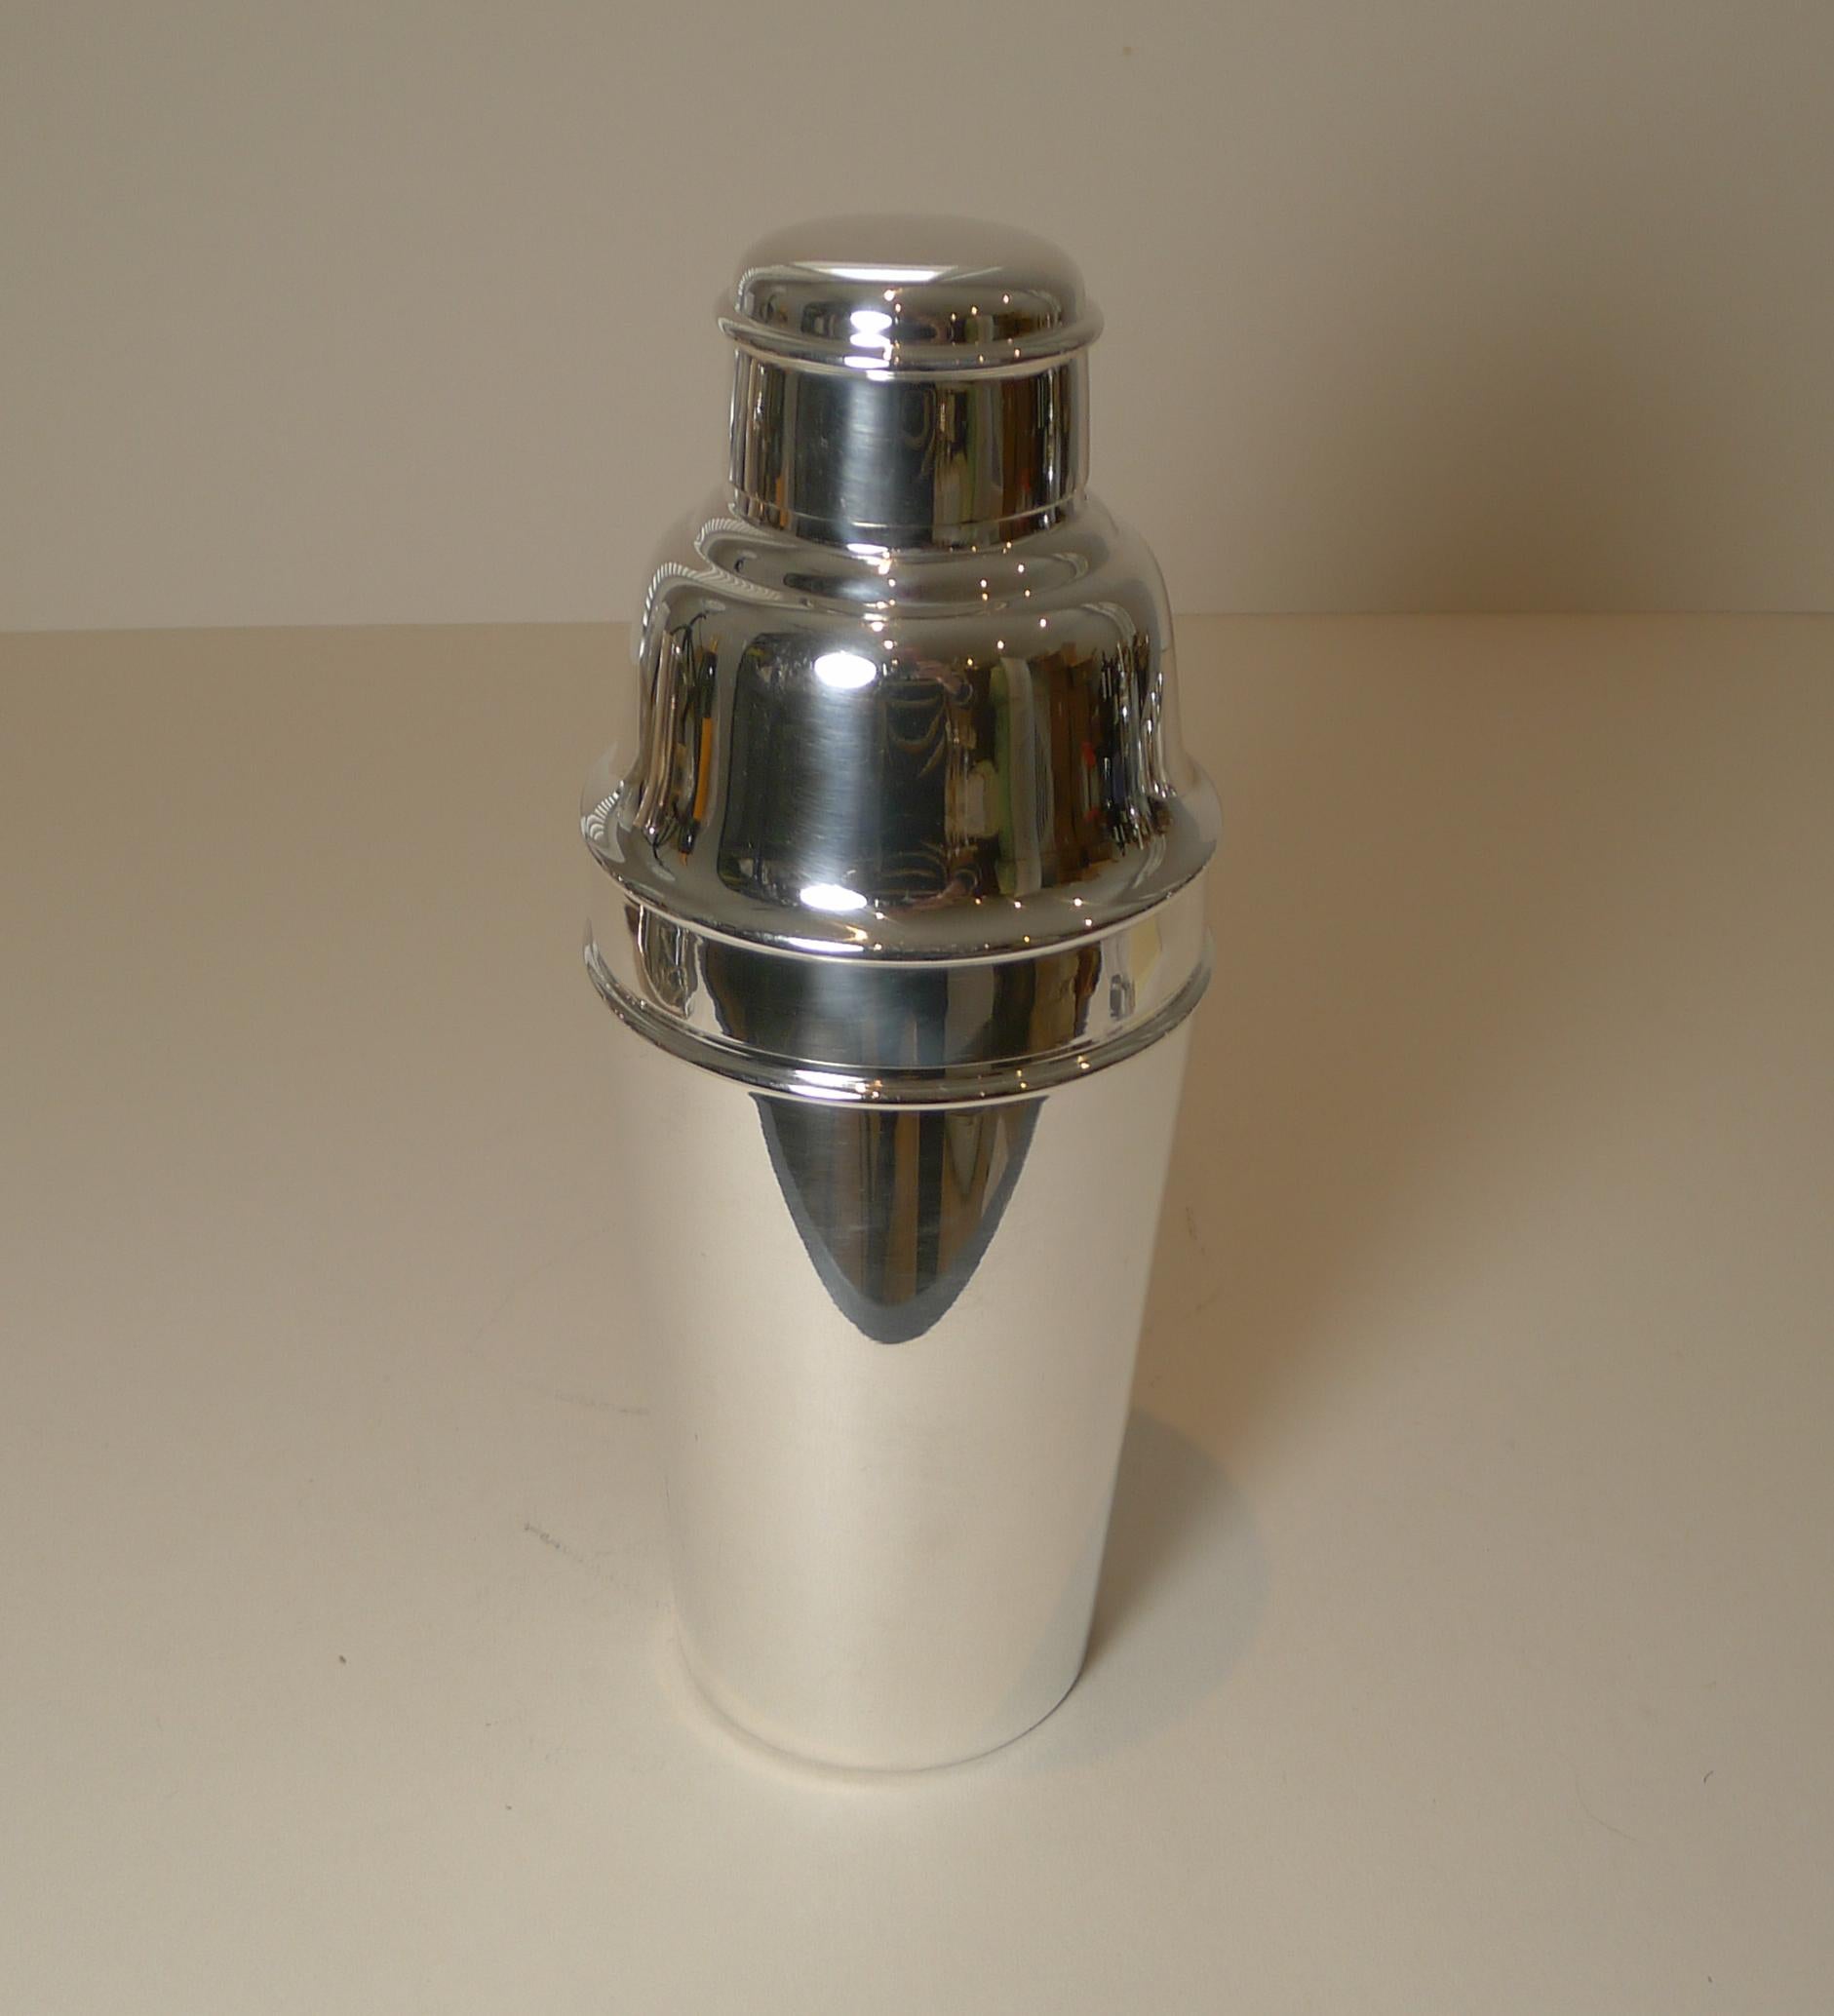 A handsome 1 pint cocktail shaker in silver plate by the top-notch silversmith, Mappin & Webb of London and Sheffield.

The underside is fully marked together with the trademark 